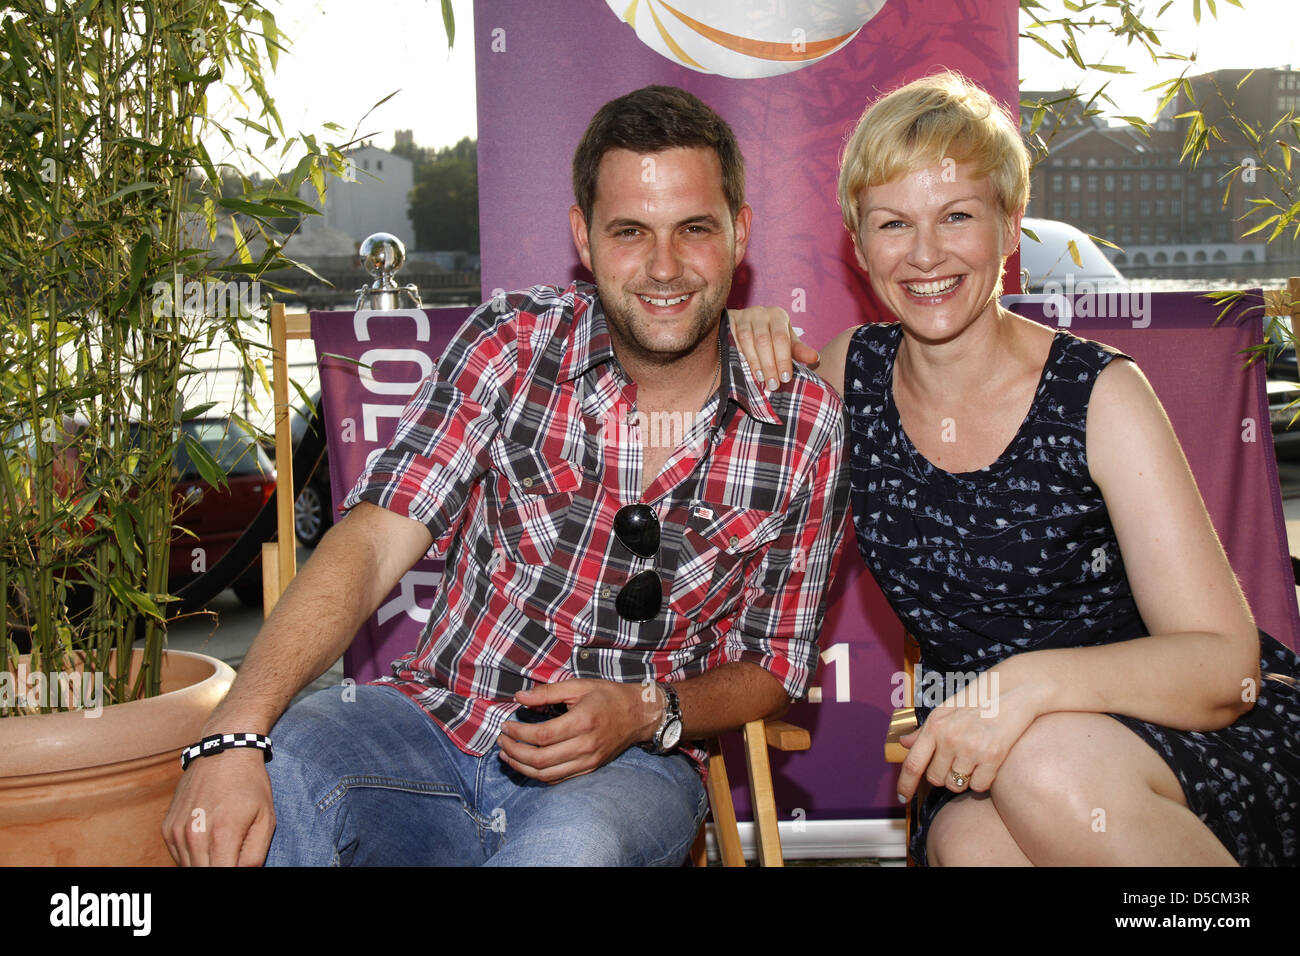 Matthias Killing and Simone Panteleit at the evening barbecue of 'Sat 1 Fruehstuecksfernsehen' sponsored by the TV station Stock Photo